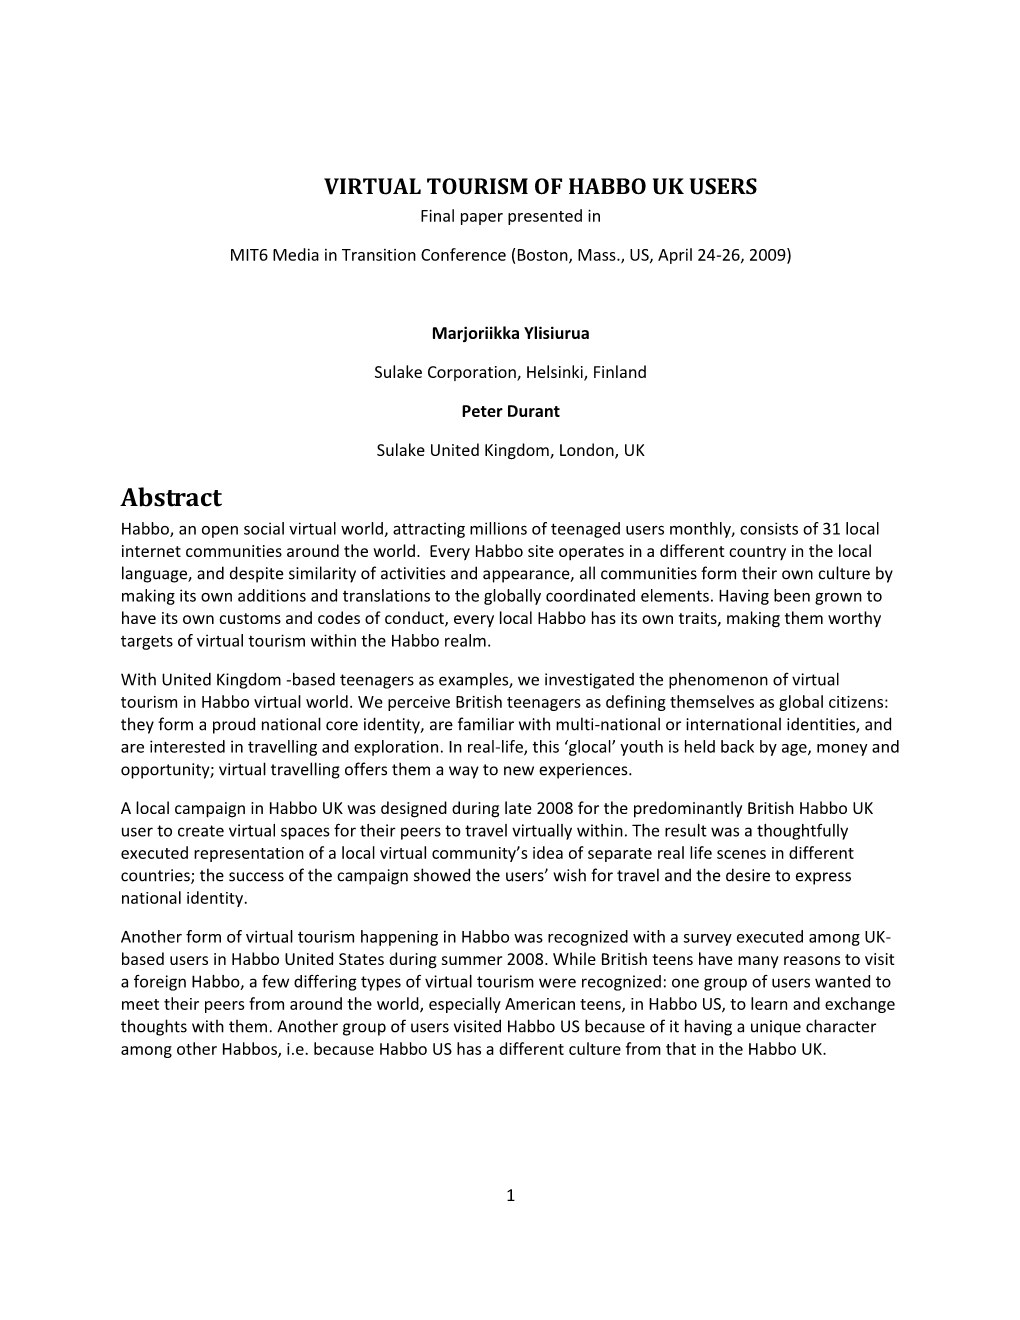 VIRTUAL TOURISM of HABBO UK USERS Final Paper Presented In